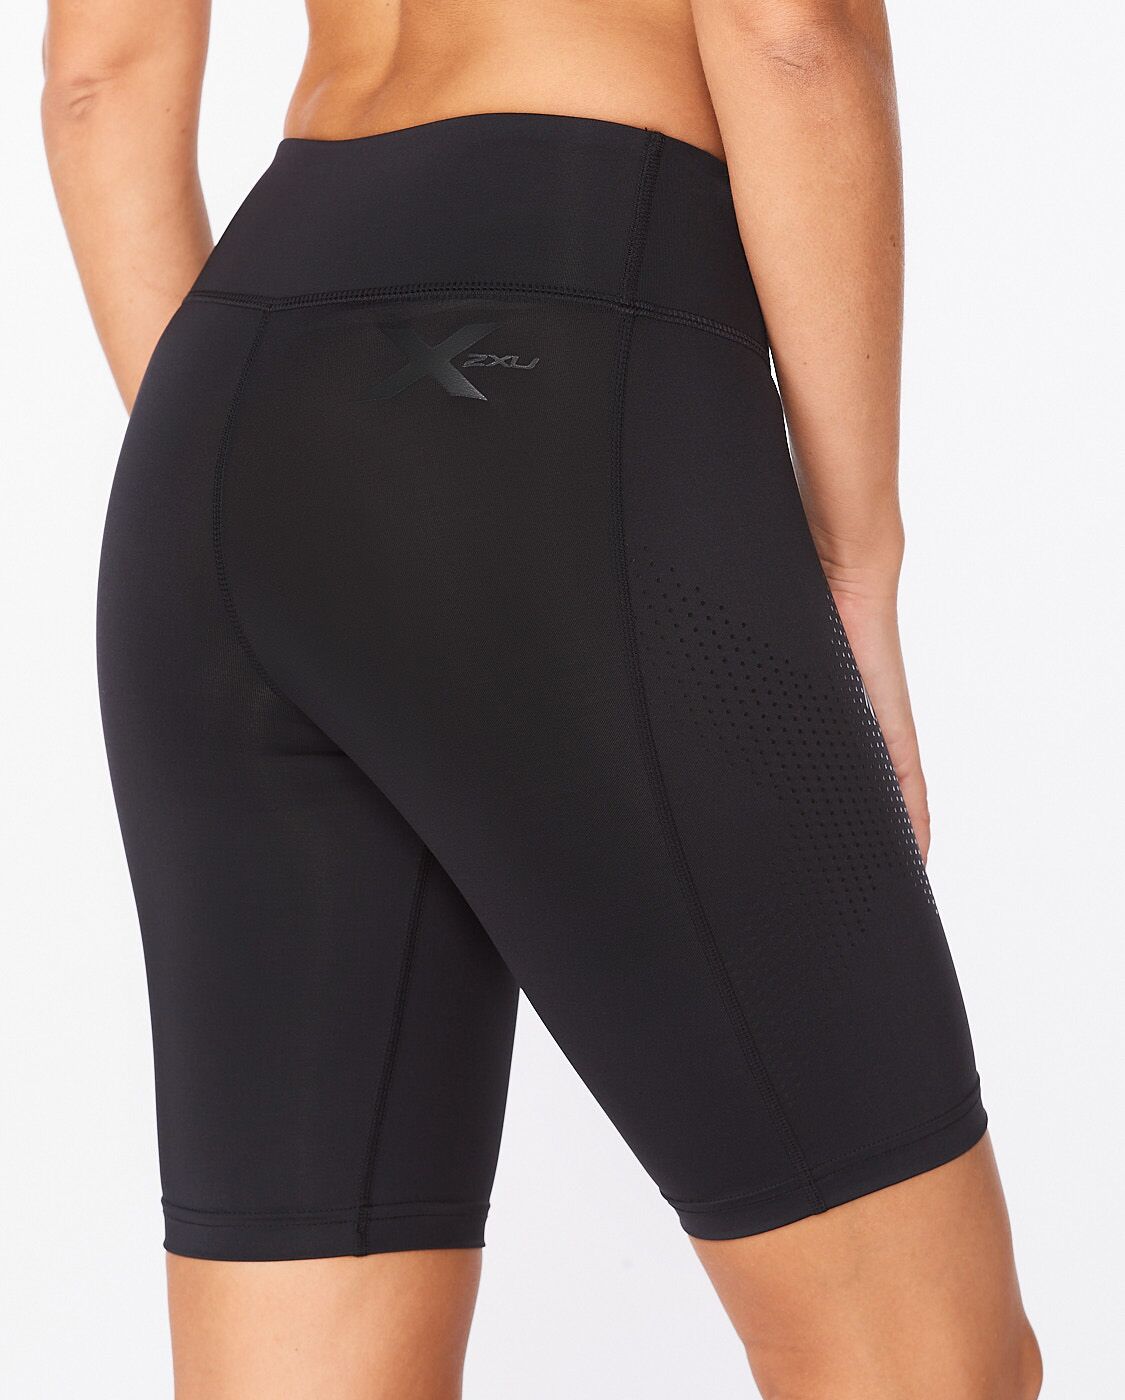 2XU South Africa - Womens Motion Mid-Rise Compression Short - Black/Dotted Black Logo